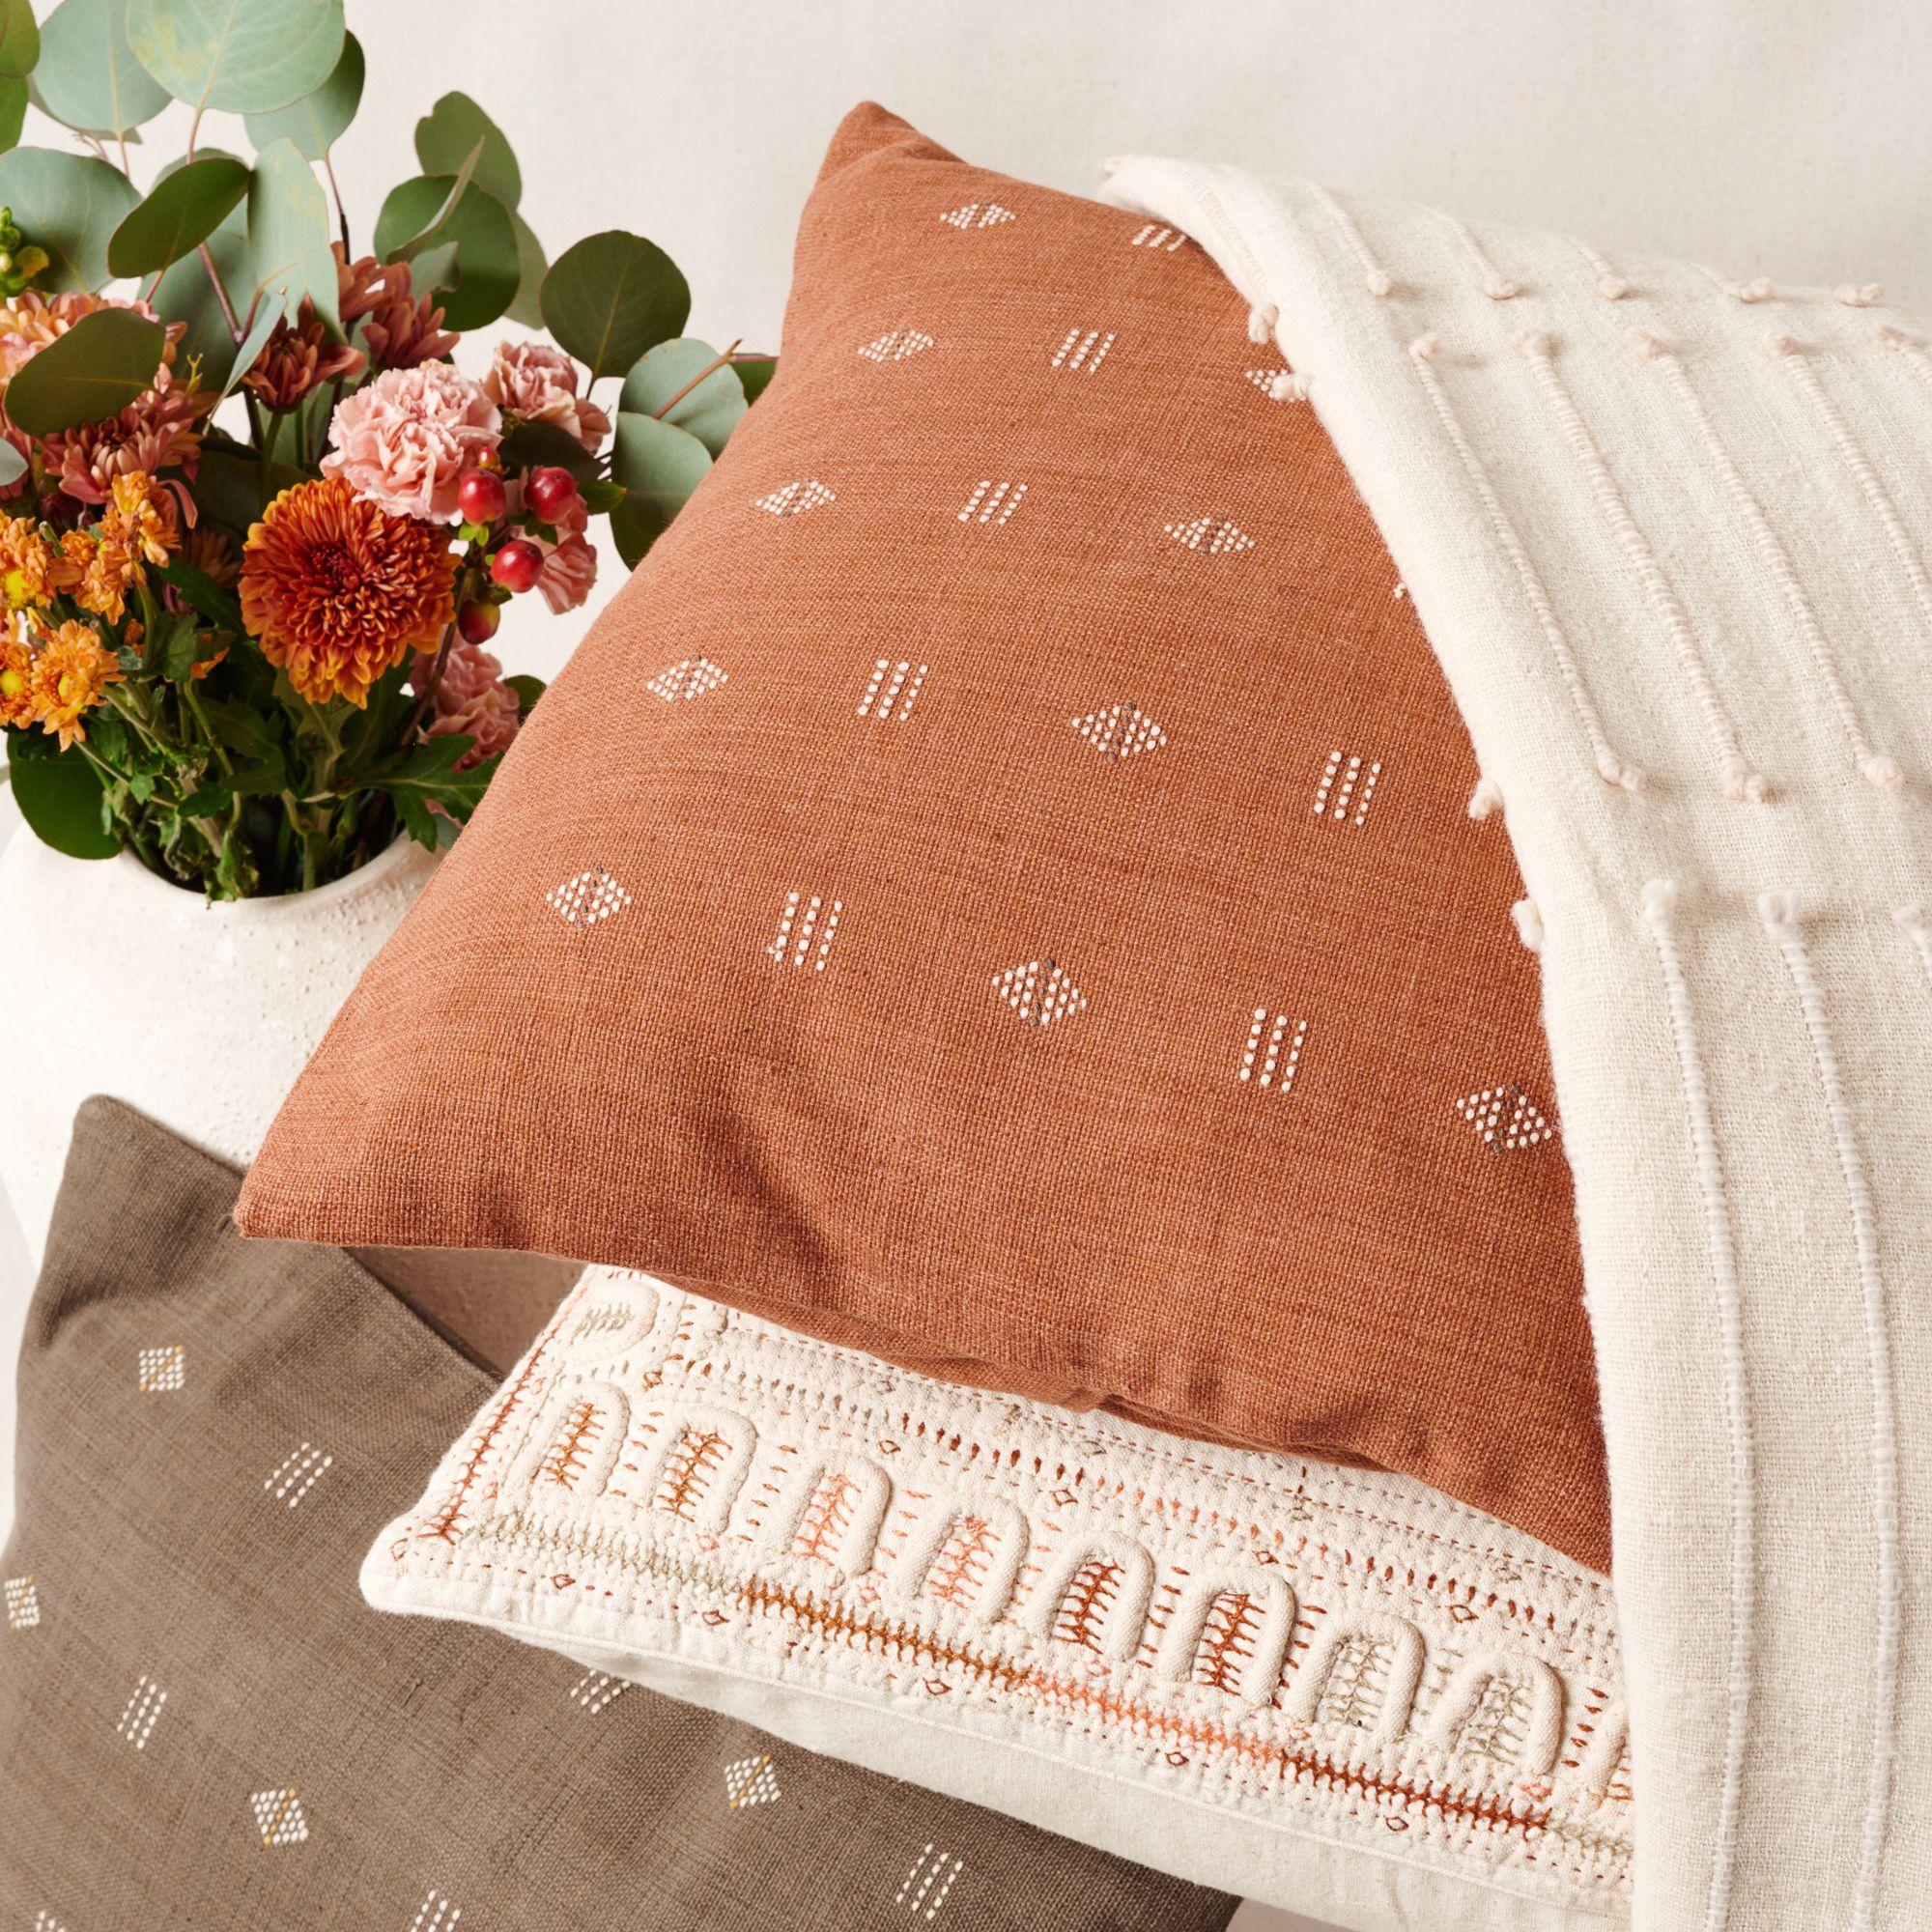 Nira Brown Pillow is a slightly textured handwoven pillow where our artisans have skillfully created a classic pattern using an ancient weaving technique. Undyed yarn is used as a design element with the backdrop of pleasant hues of terra-cotta